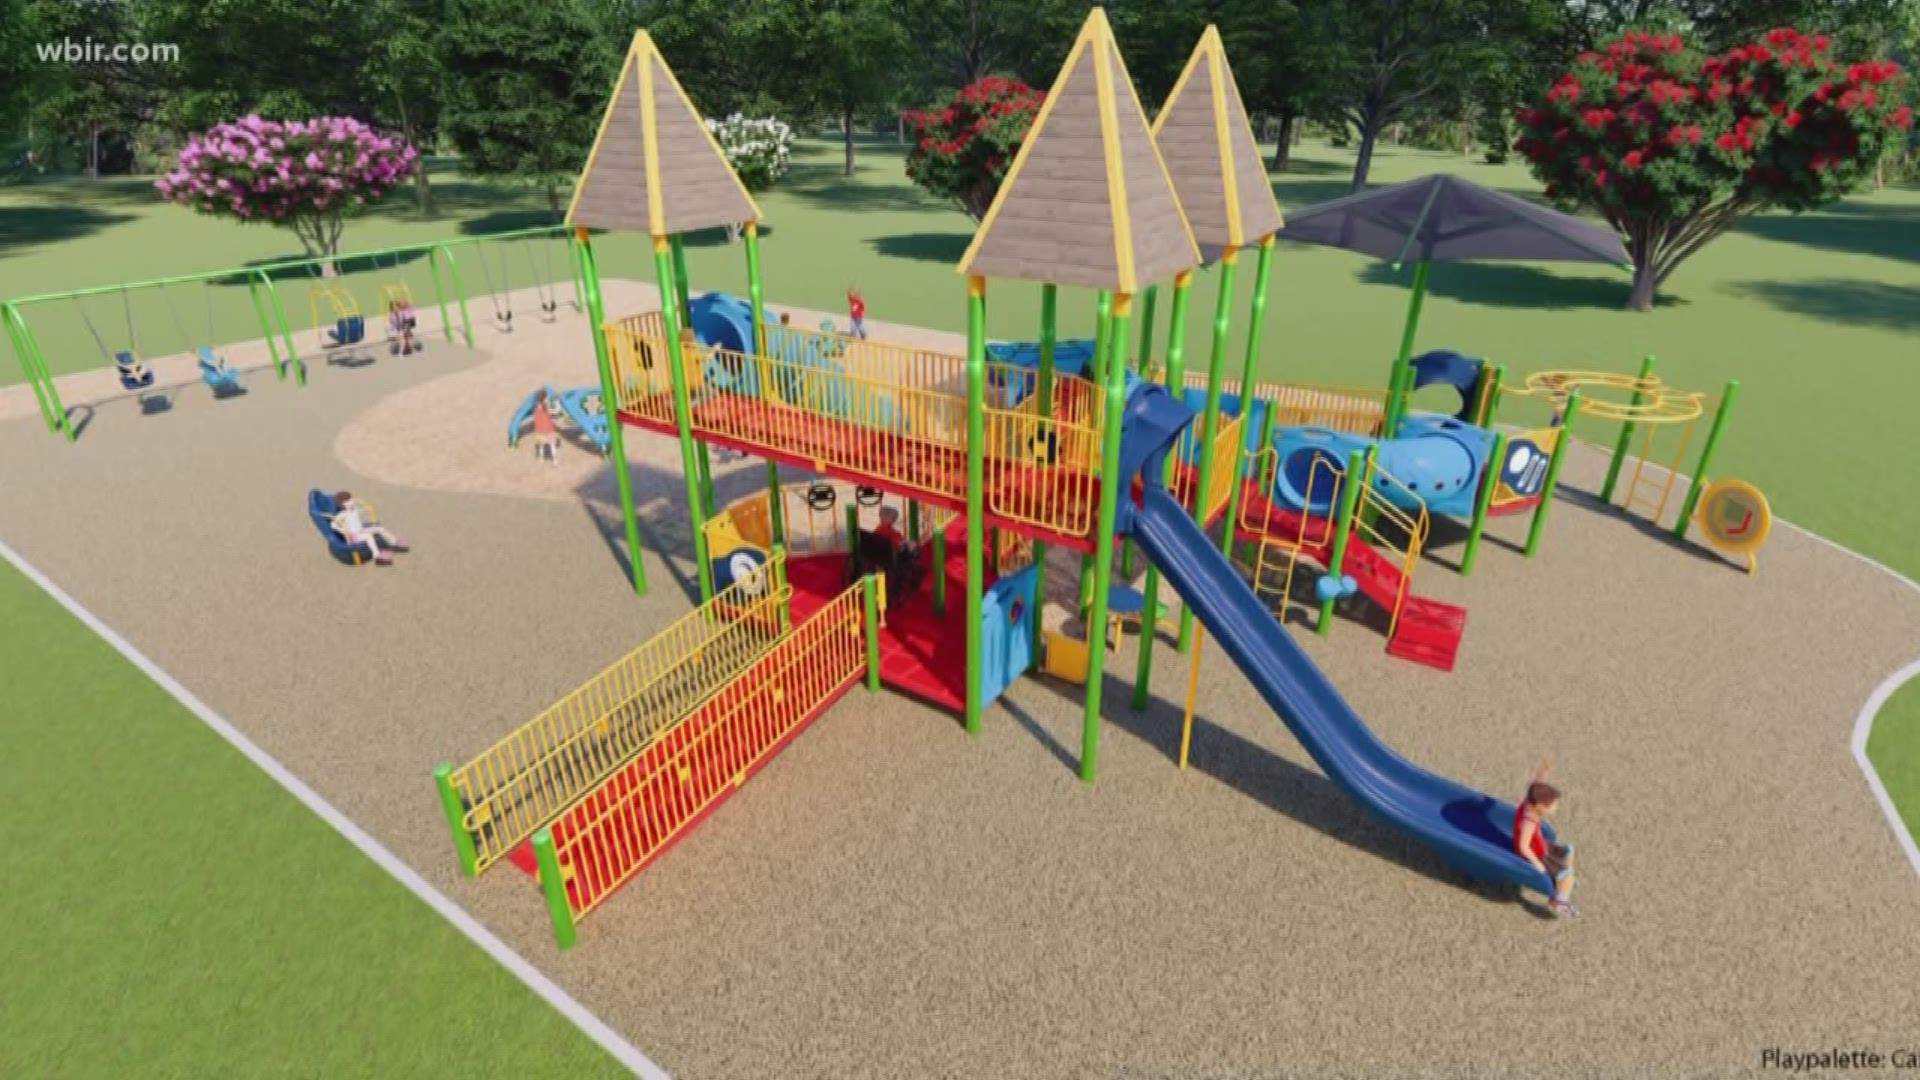 The parks and recreation commission director says this would be the first park that is almost totally accessible for those with disabilities.